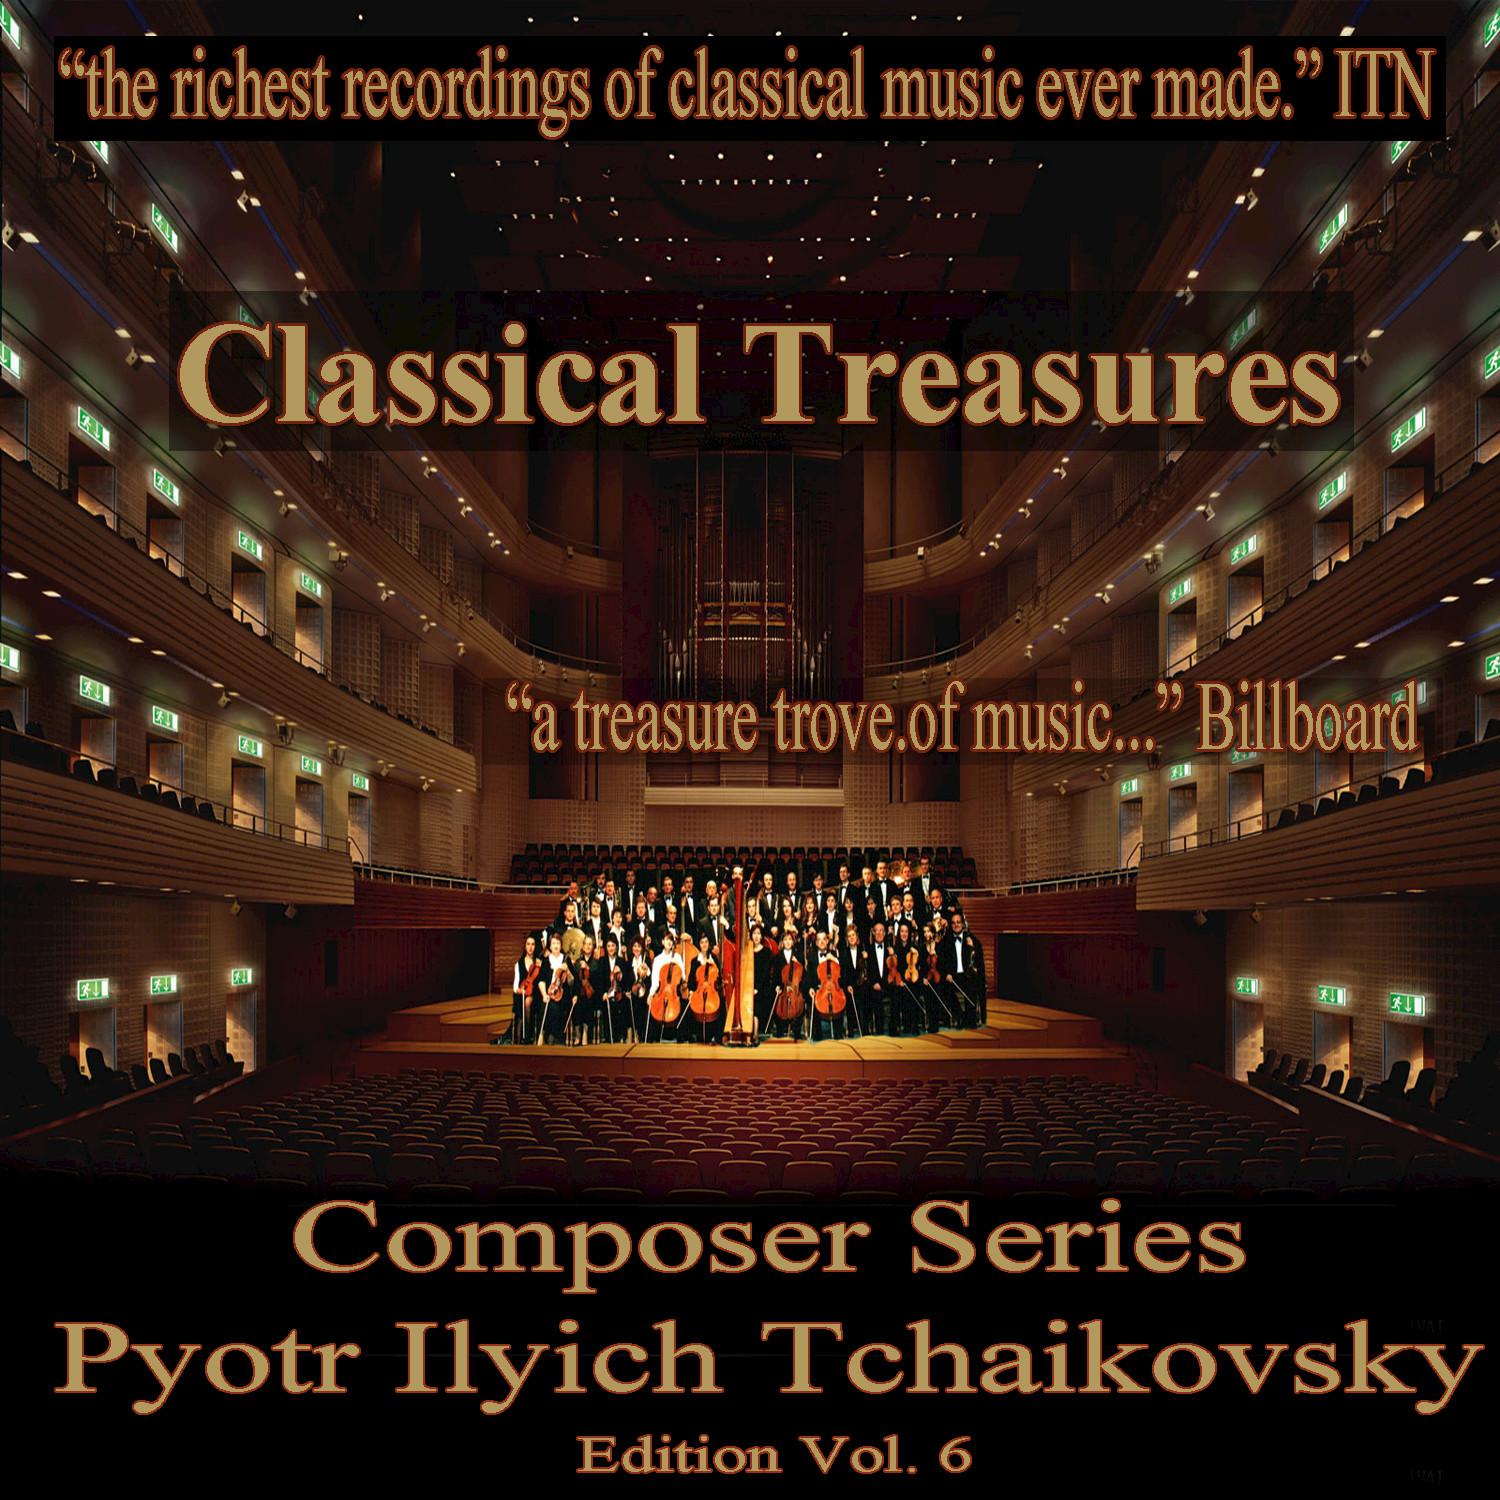 Classical Treasures Composer Series: Pytor Ilyich Tchaikovsky, Vol. 6